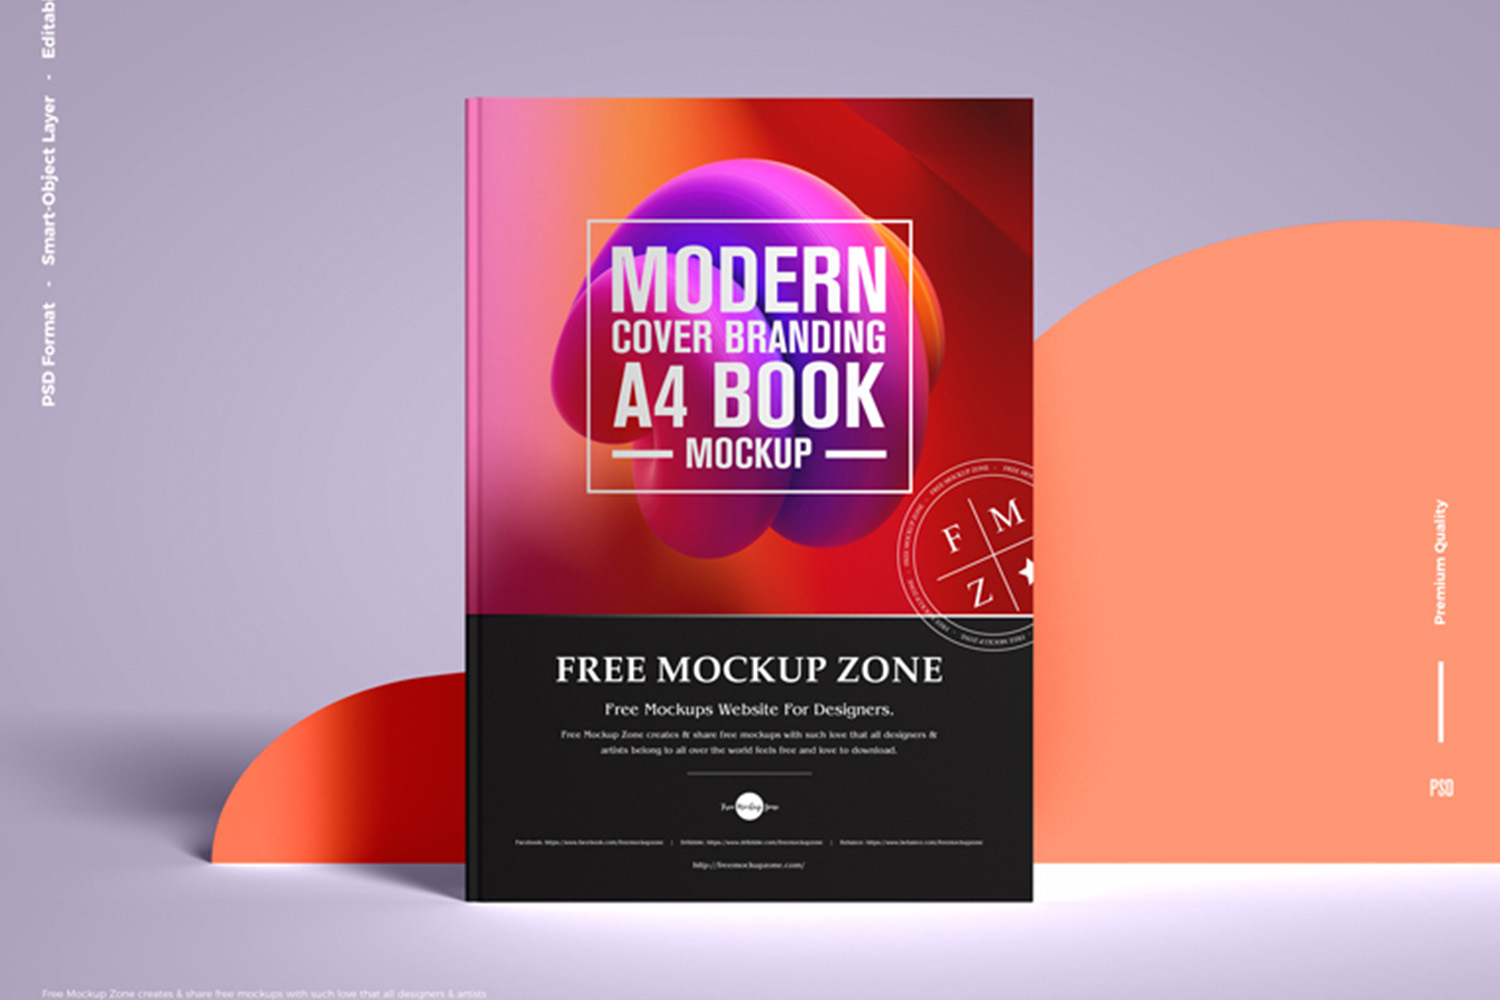 Modern Cover Branding A4 Book Mockup Free Download